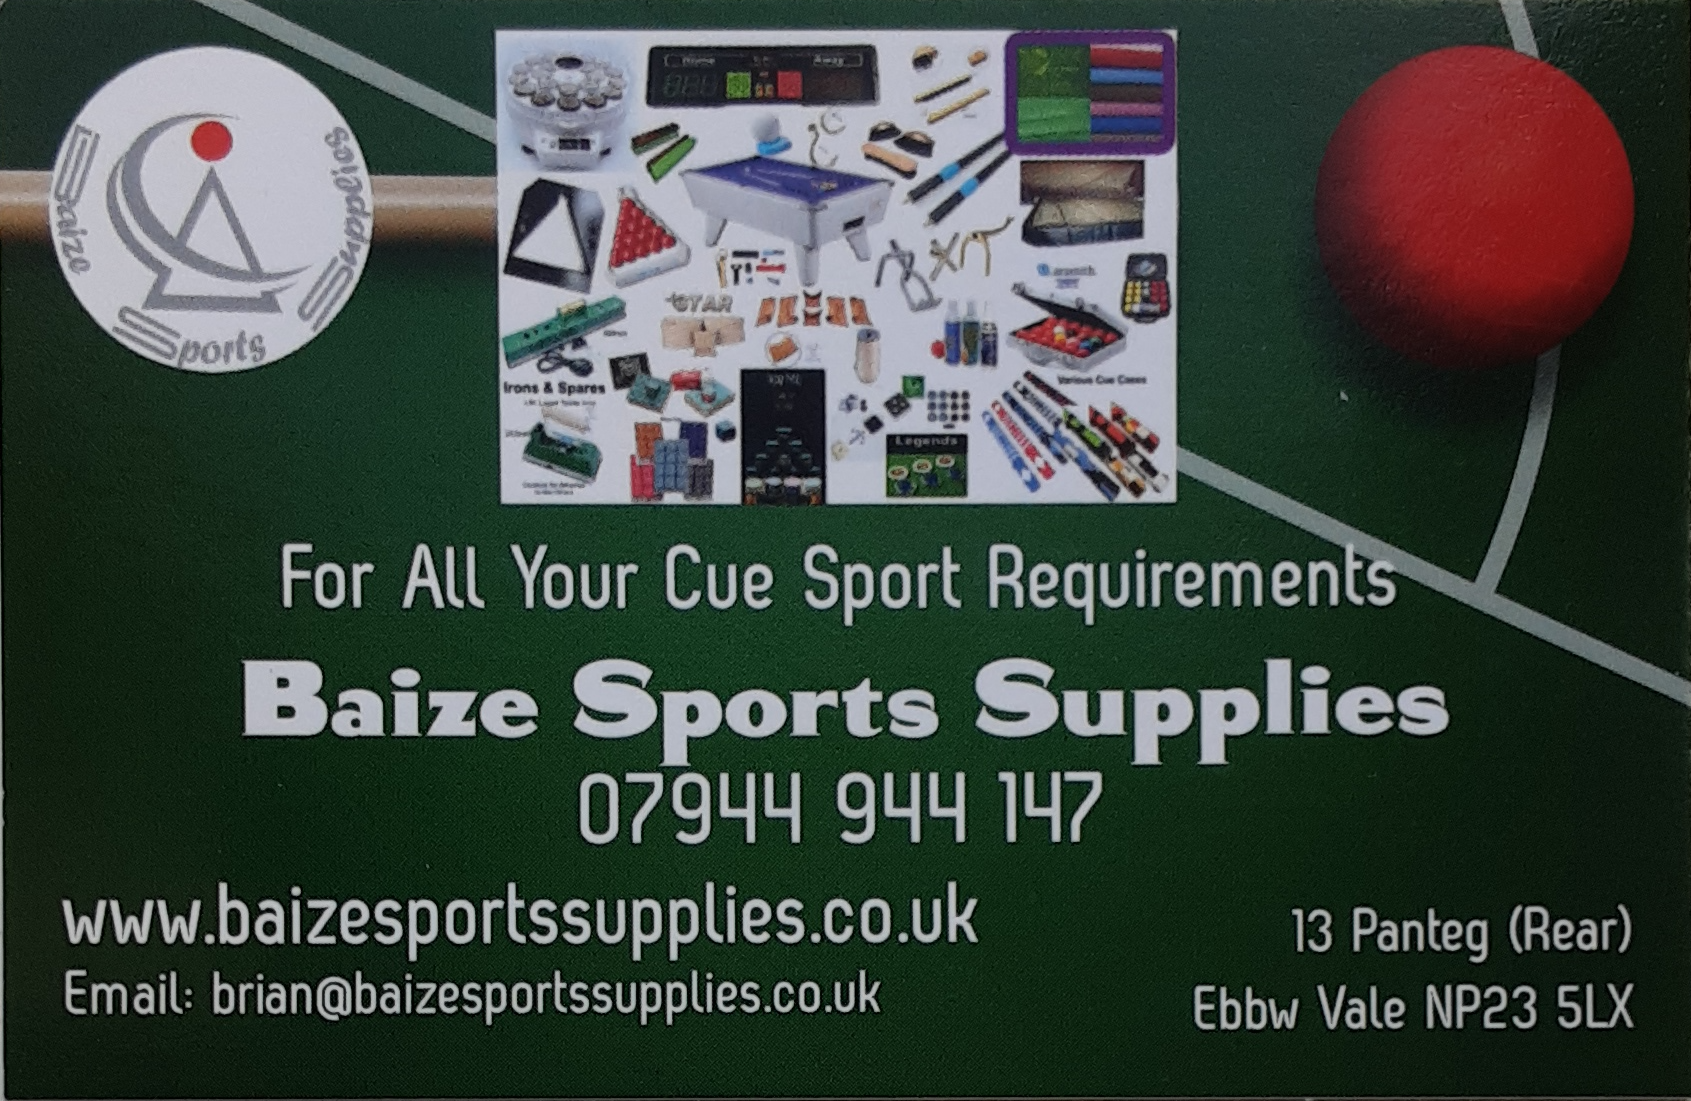 Baize Sports Supplies, For all your cue sport requirements.